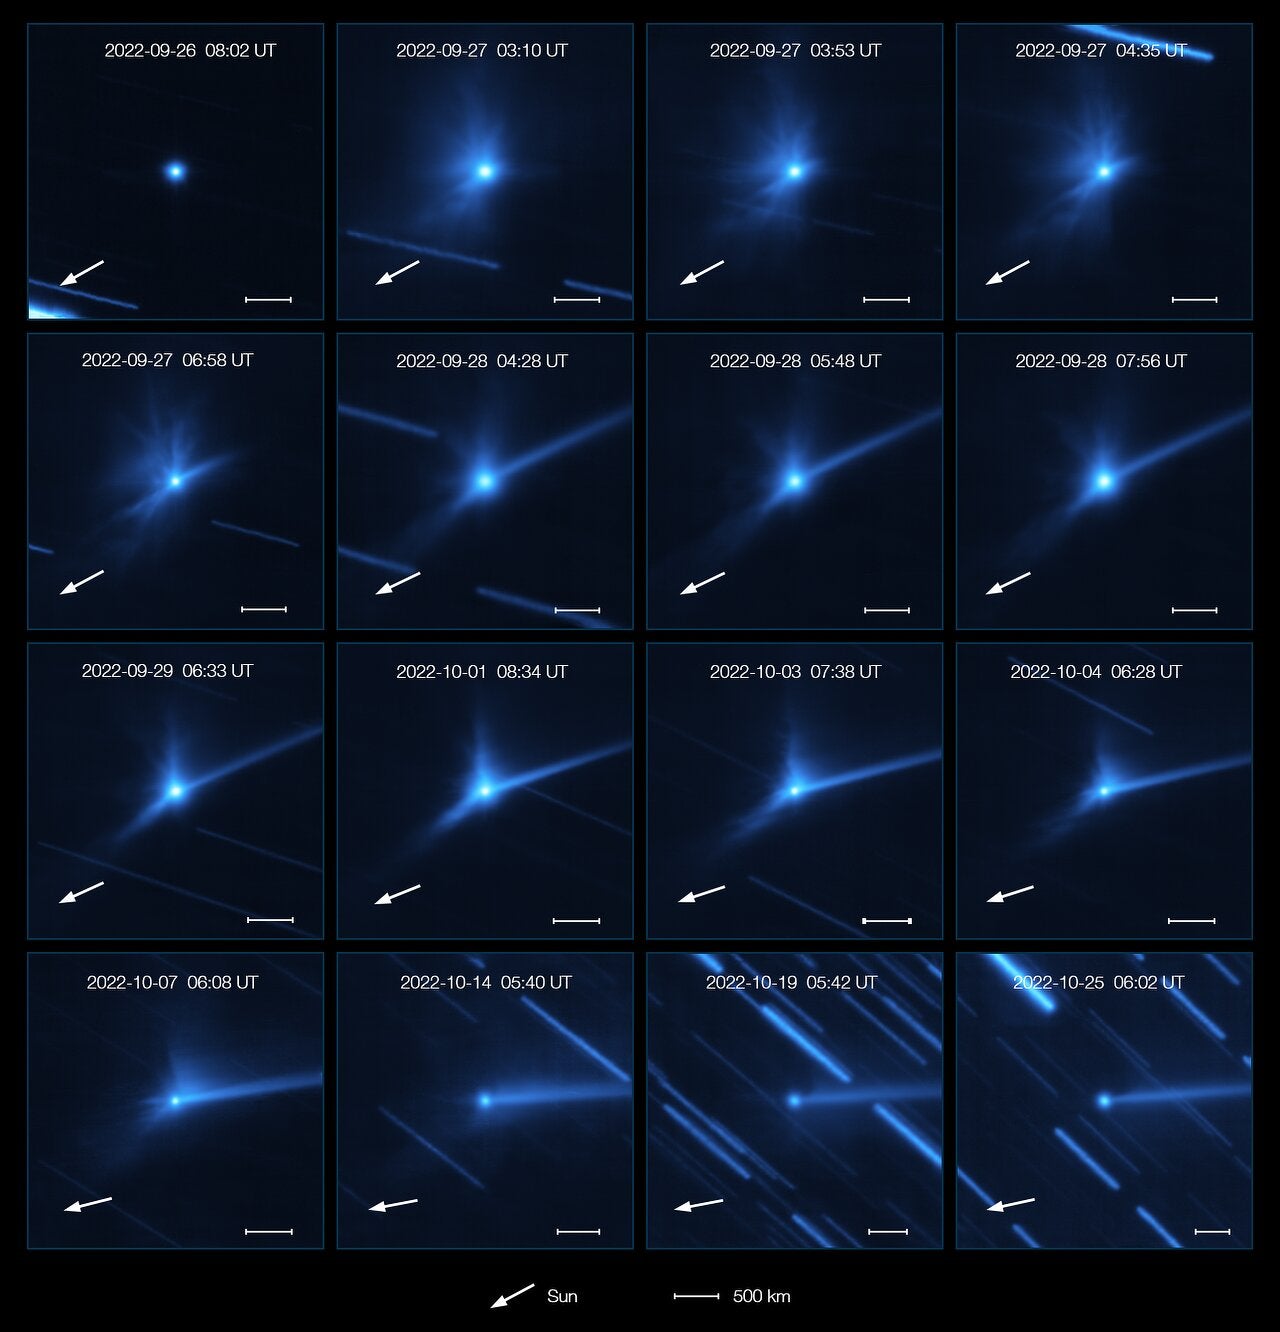 This series of images, taken with the MUSE instrument on ESO’s Very Large Telescope, shows the evolution of the cloud of debris that was ejected when NASA’s DART spacecraft collided with the asteroid Dimorphos. The first image was taken on 26 September 2022, just before the impact, and the last one was taken almost one month later on 25 October. Over this period several structures developed: clumps, spirals, and a long tail of dust pushed away by the Sun’s radiation. The white arrow in each panel marks the direction of the Sun. Dimorphos orbits a larger asteroid called Didymos. The white horizontal bar corresponds to 500 kilometres, but the asteroids are only 1 kilometre apart, so they can’t be discerned in these images. The background streaks seen here are due to the apparent movement of the background stars during the observations while the telescope was tracking the asteroid pair.